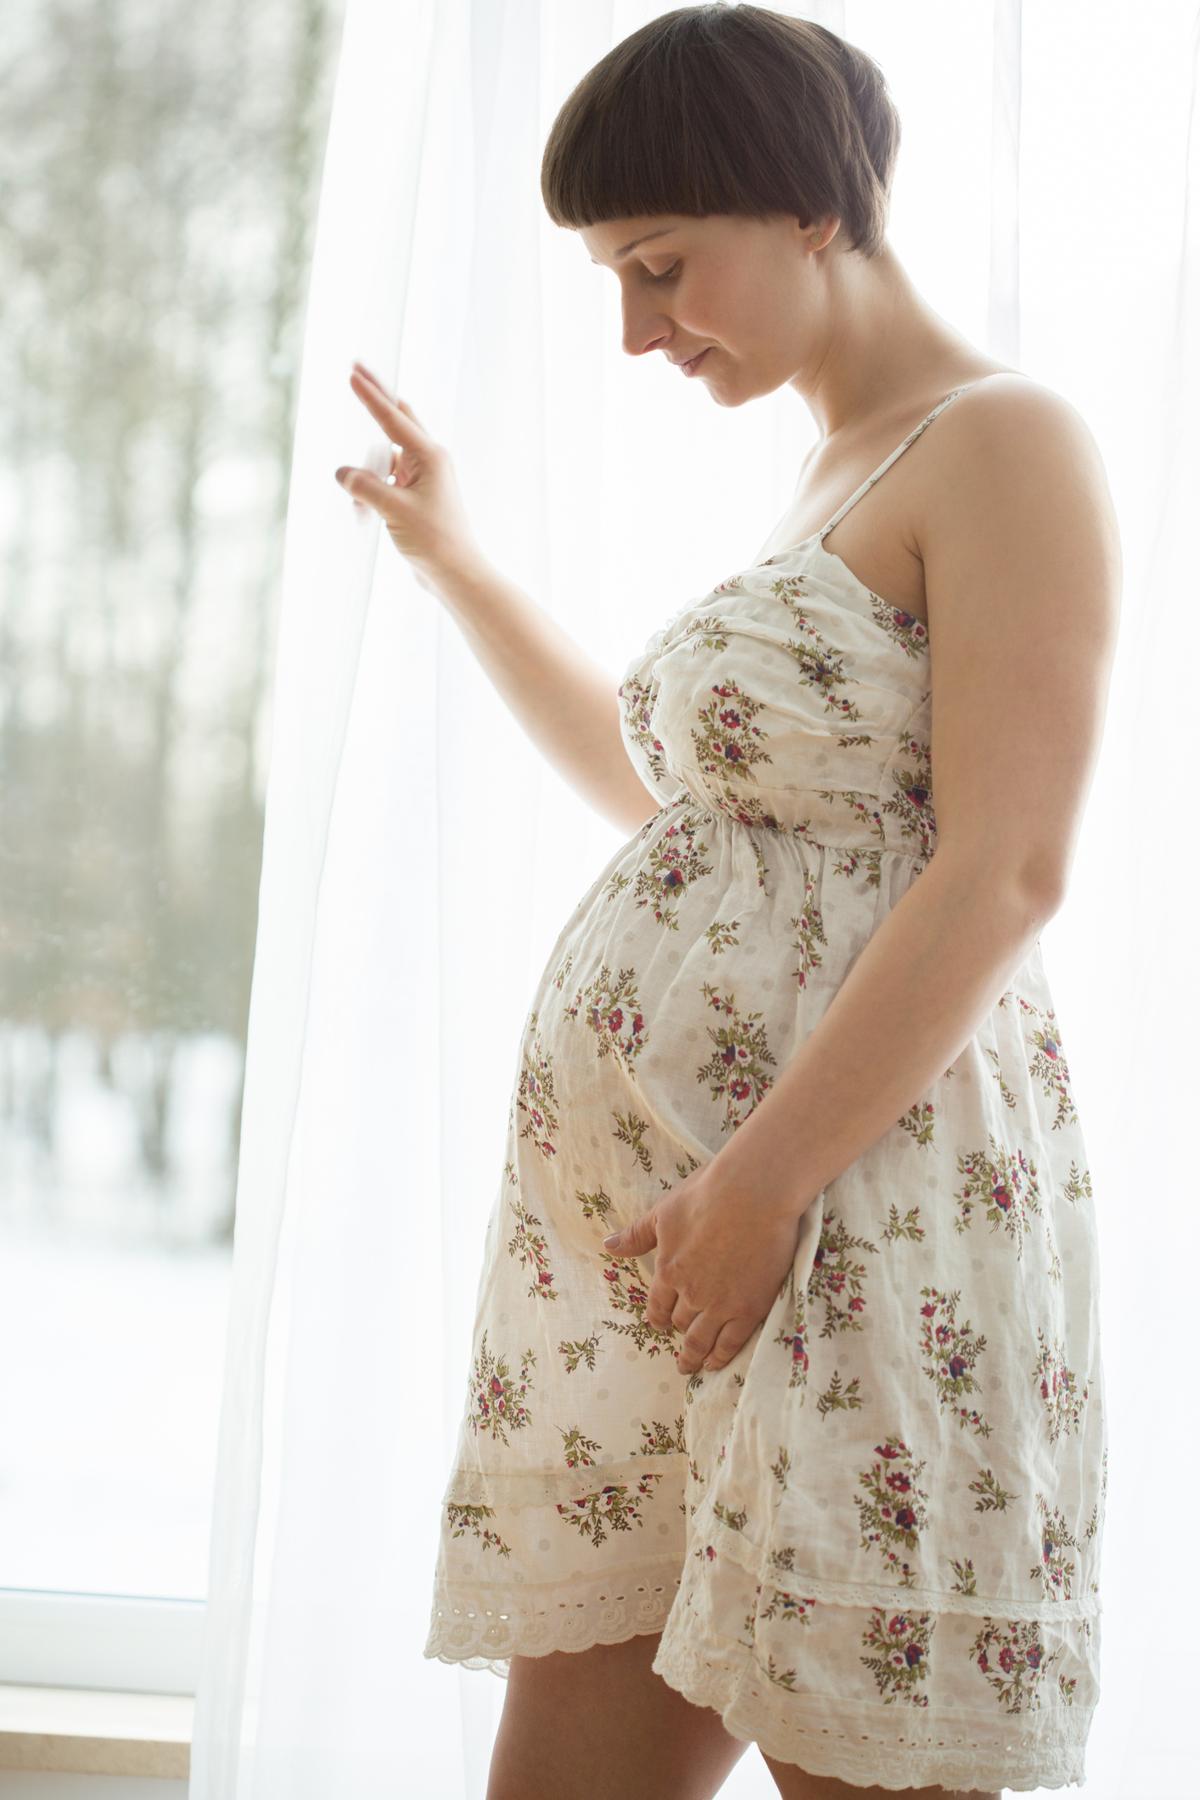 can amoxicillin cause yeast infection during pregnancy